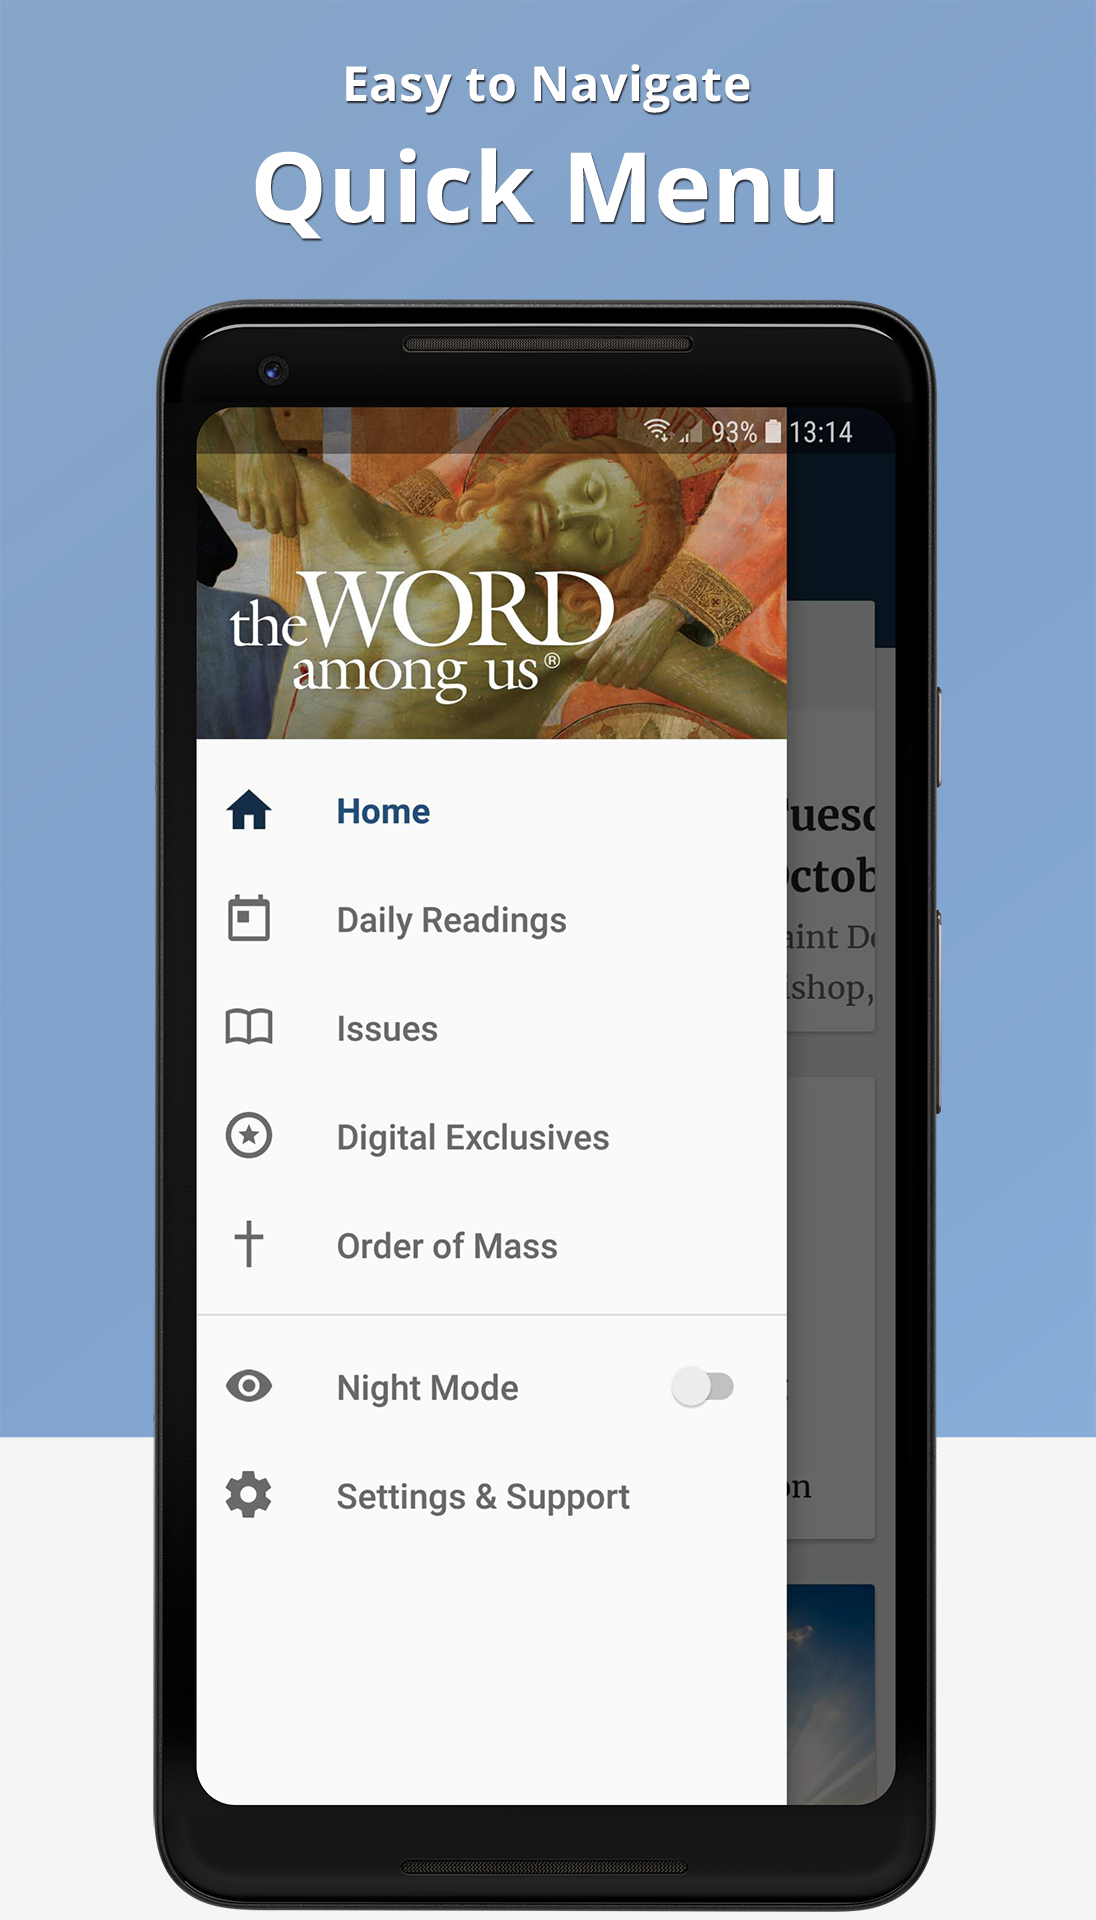 The Word Among Us Android App - Navigation Screen